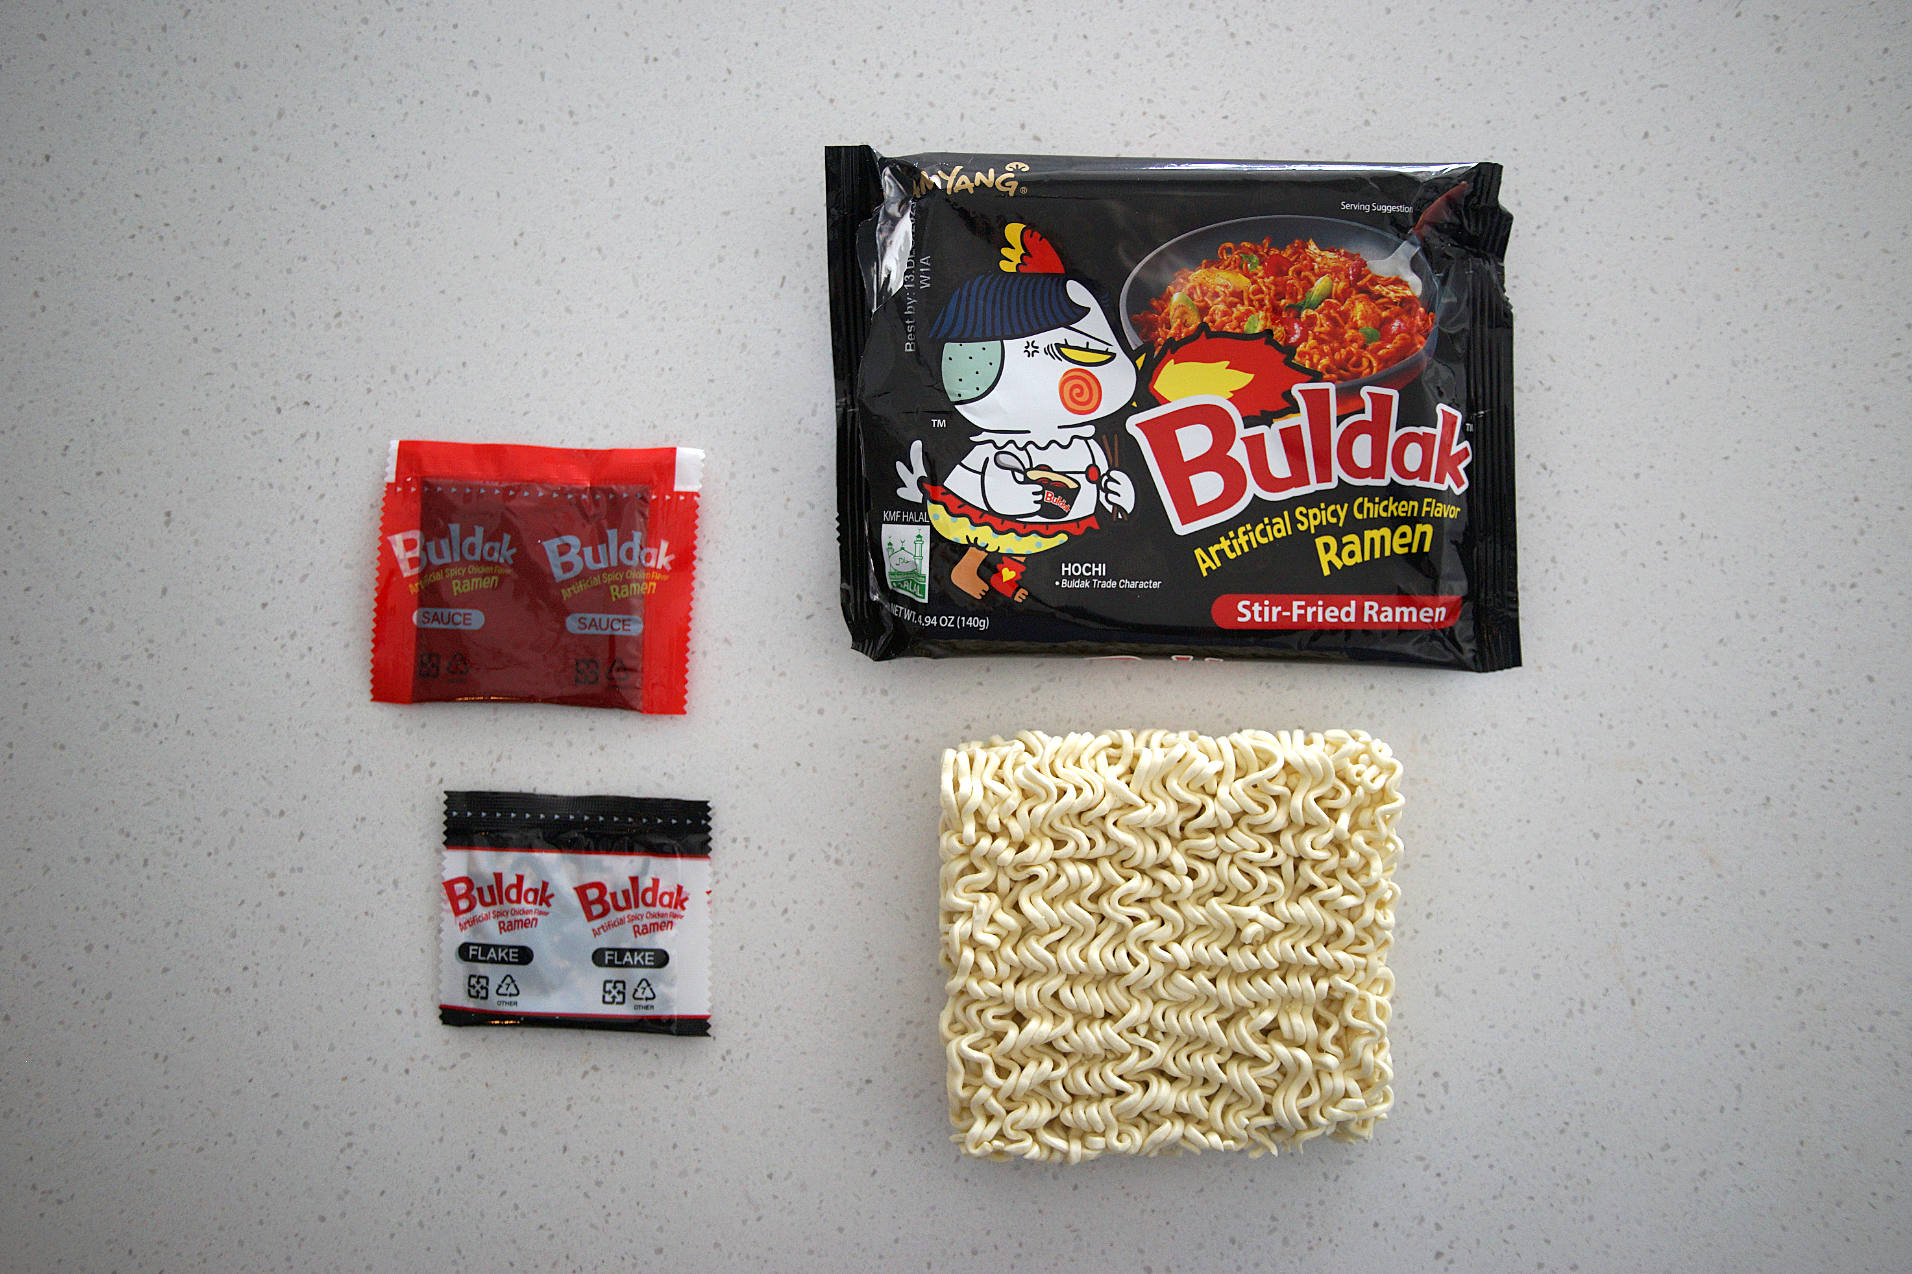 Buldak hot chicken noodles and sauce packets